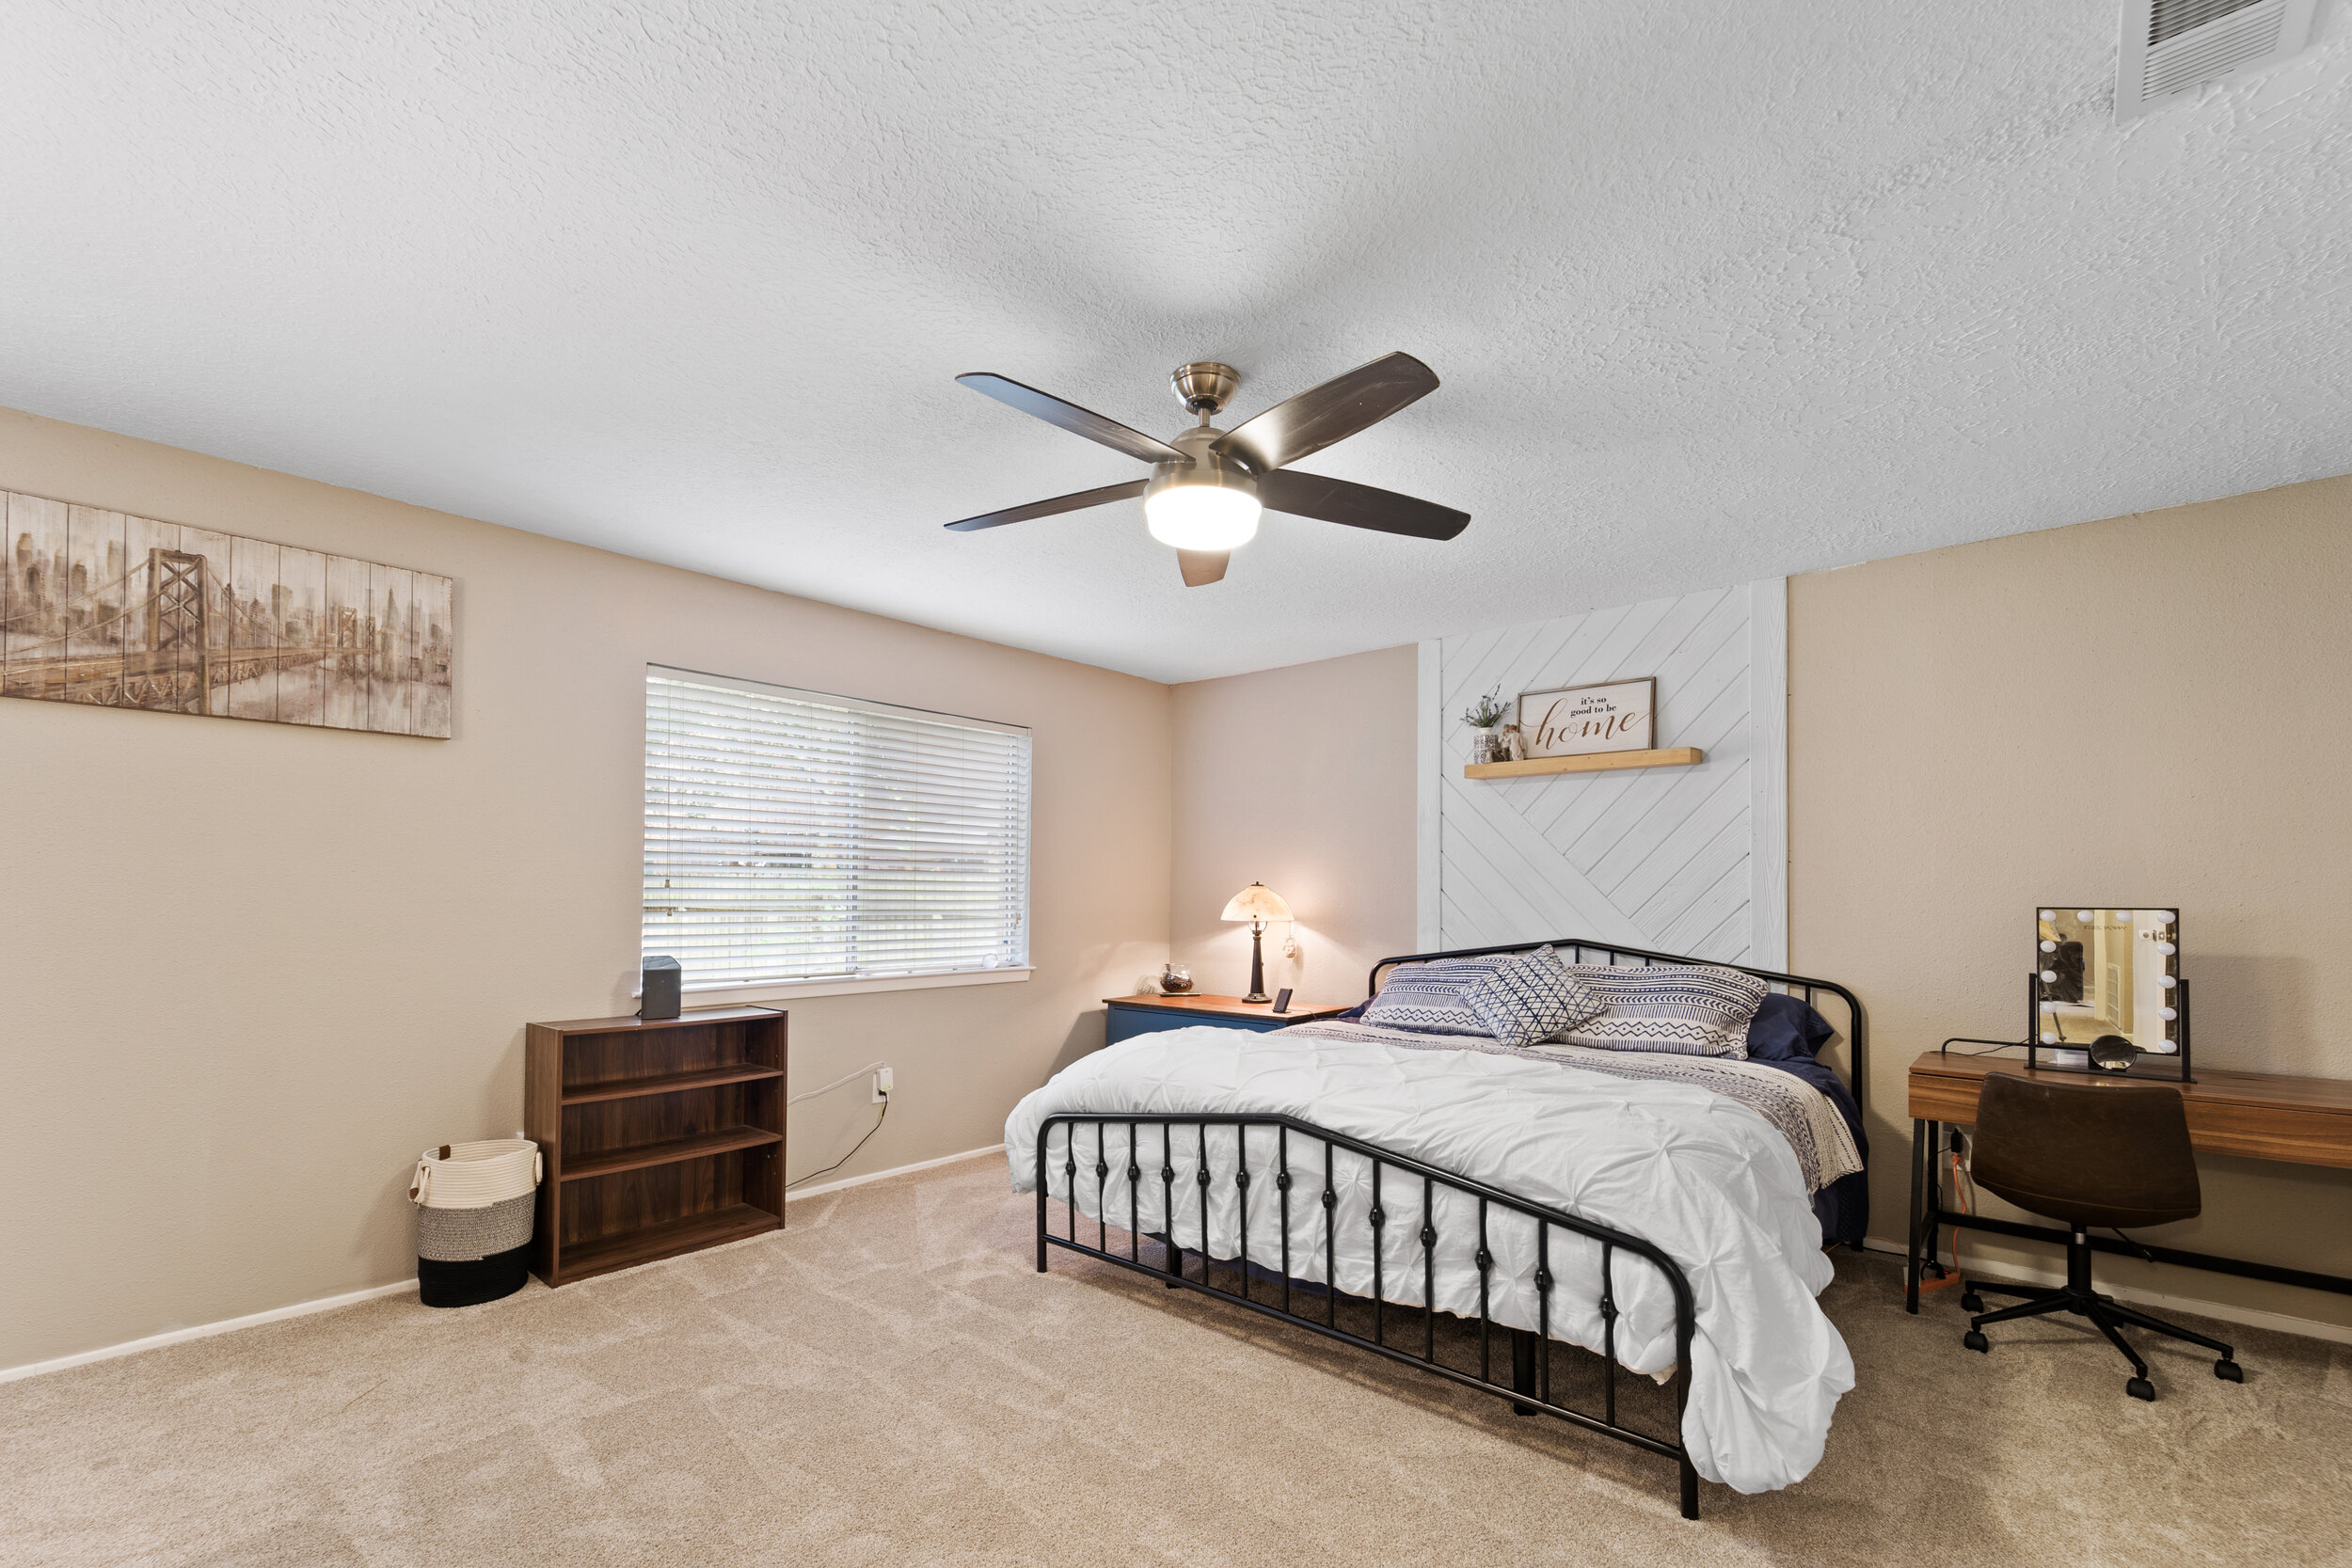 Real Estate Photography - Purefect Image